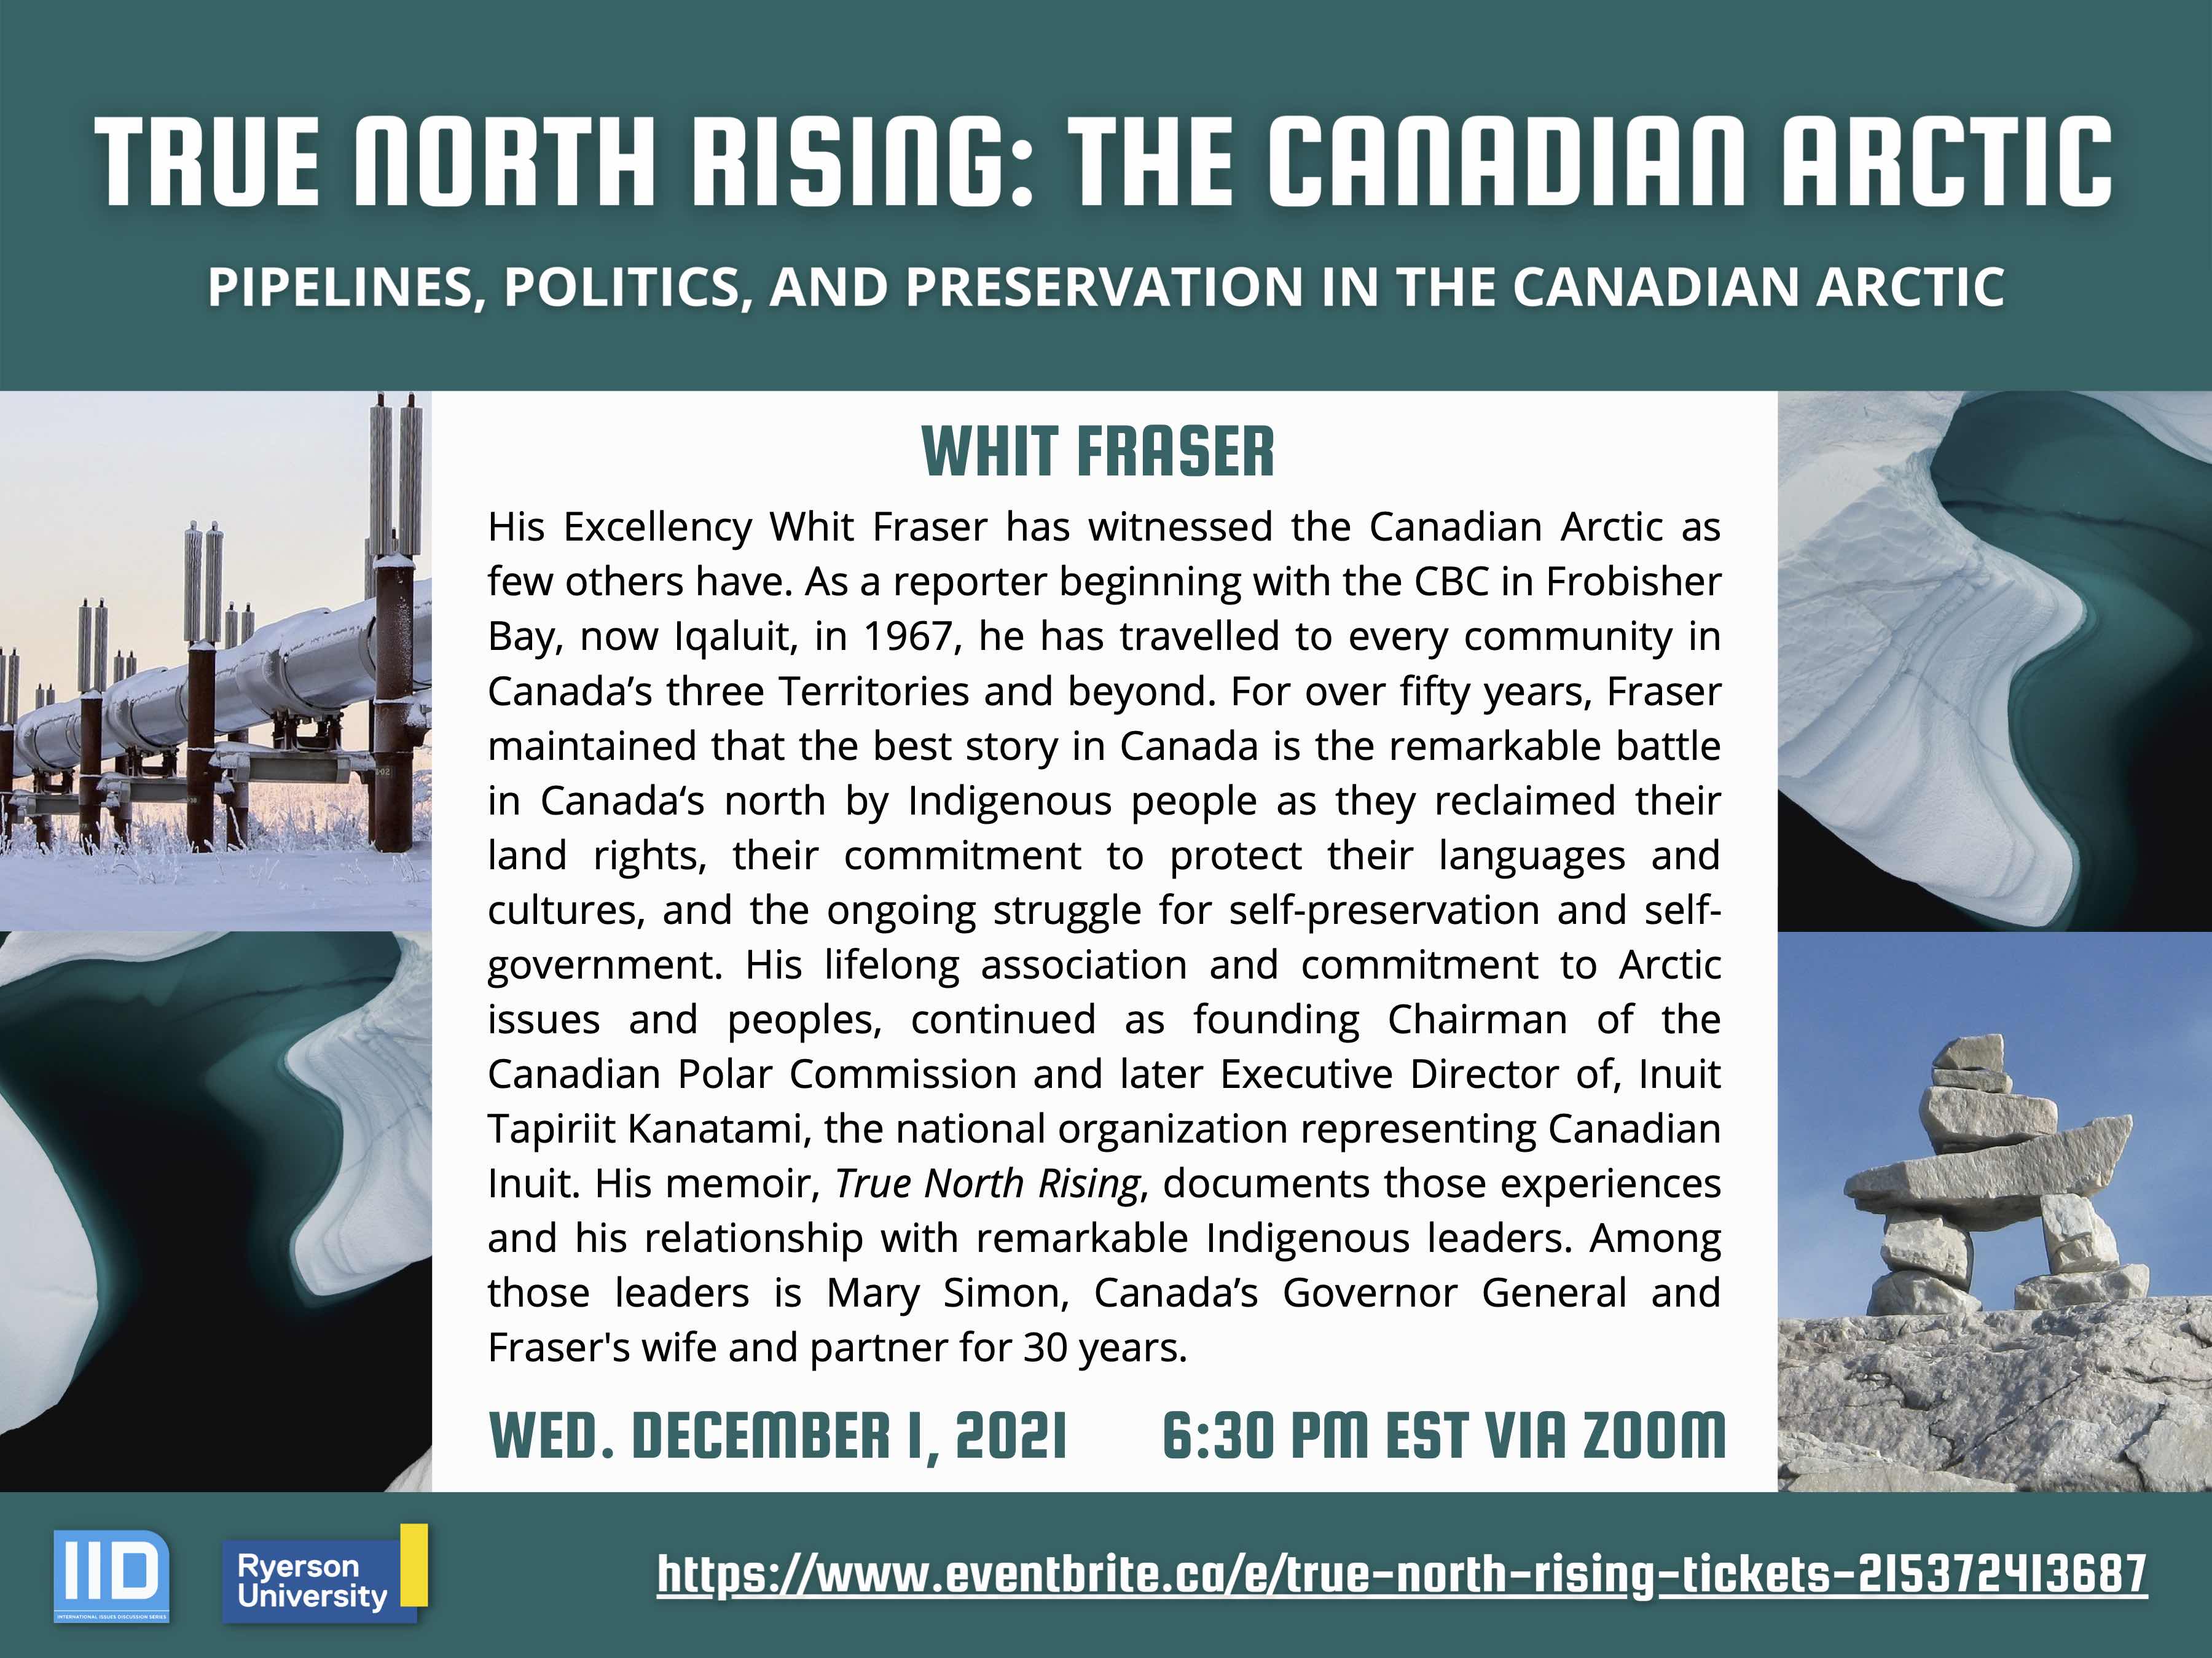 True North Rising: Pipelines, Politics, and Preservation in the Canadian Arctic